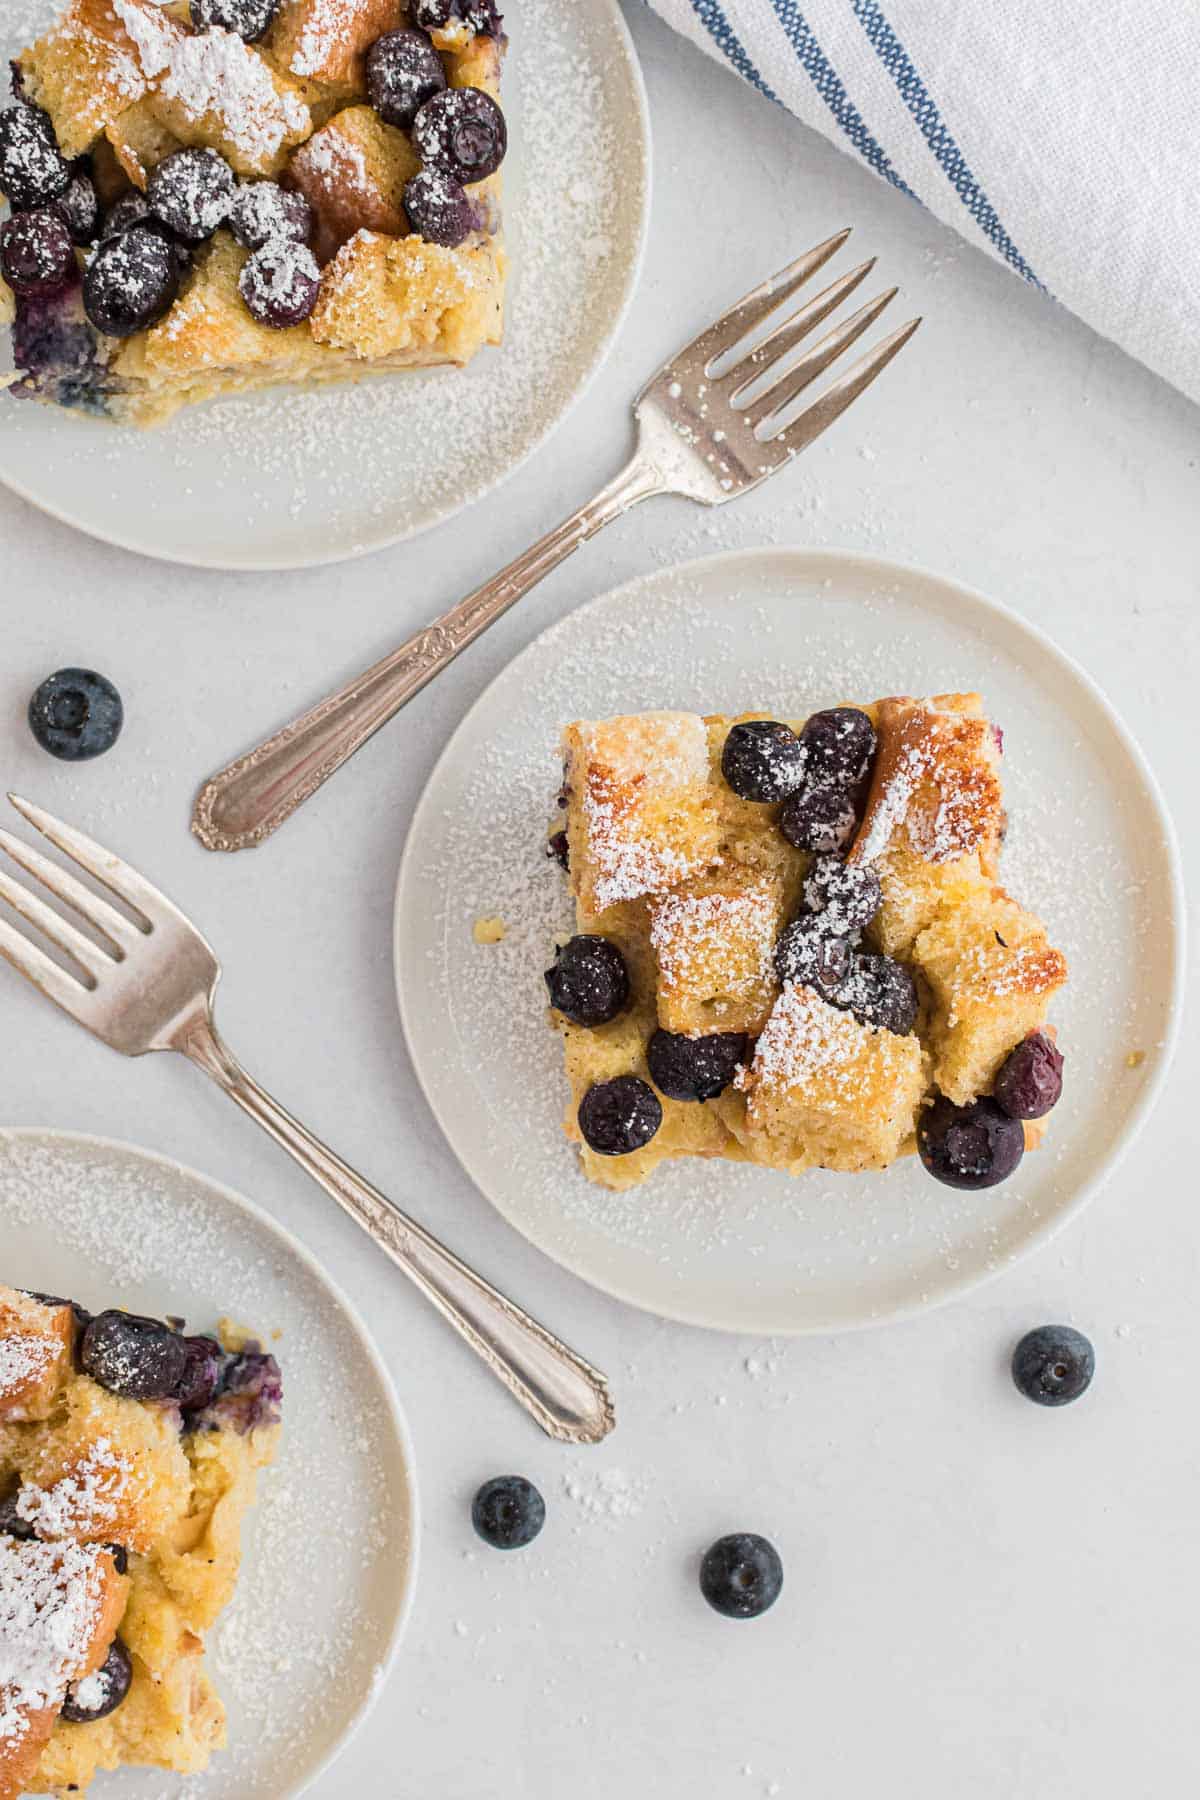 Overhead view of three slices of blueberry bread pudding on round white plates. Forks and fresh blueberries are also pictured.